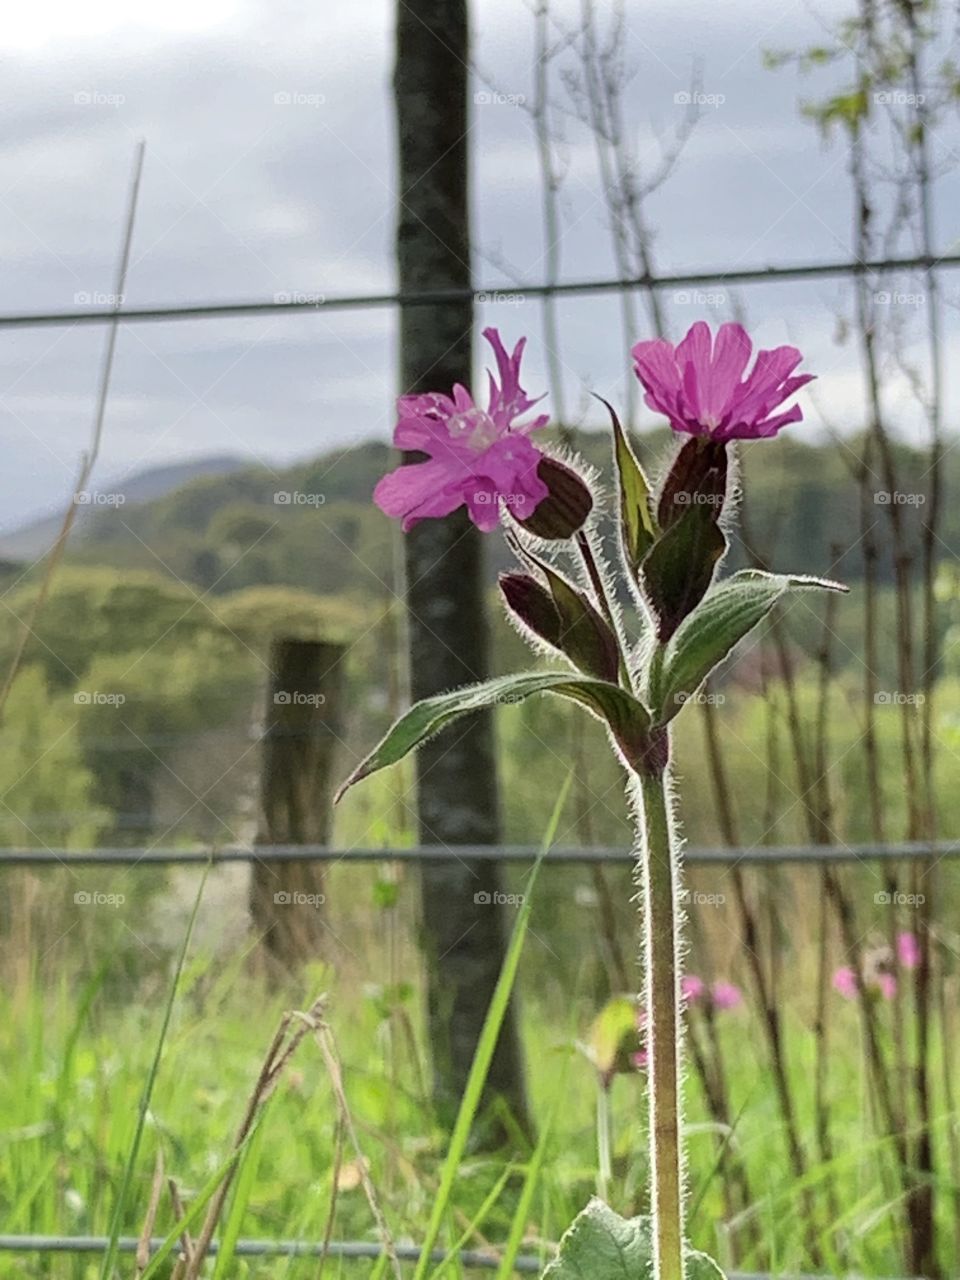 Wild flowers with hills in background